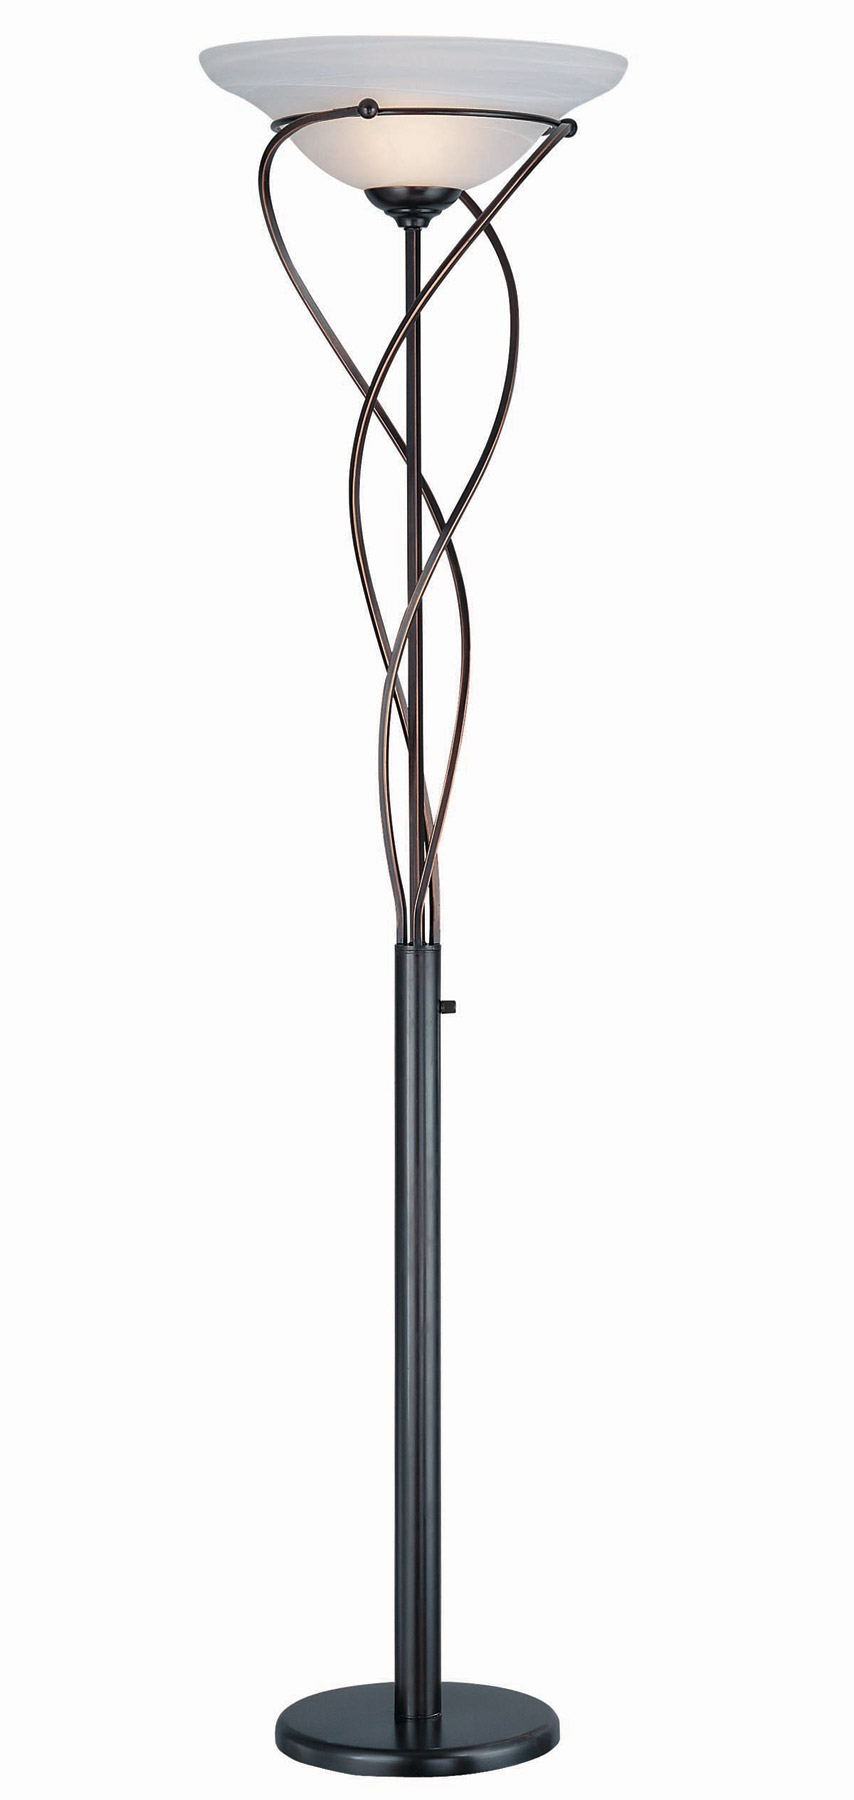 Lite Source Ls 9640dbrz Majesty Torchiere Floor Lamp with regard to dimensions 854 X 1800